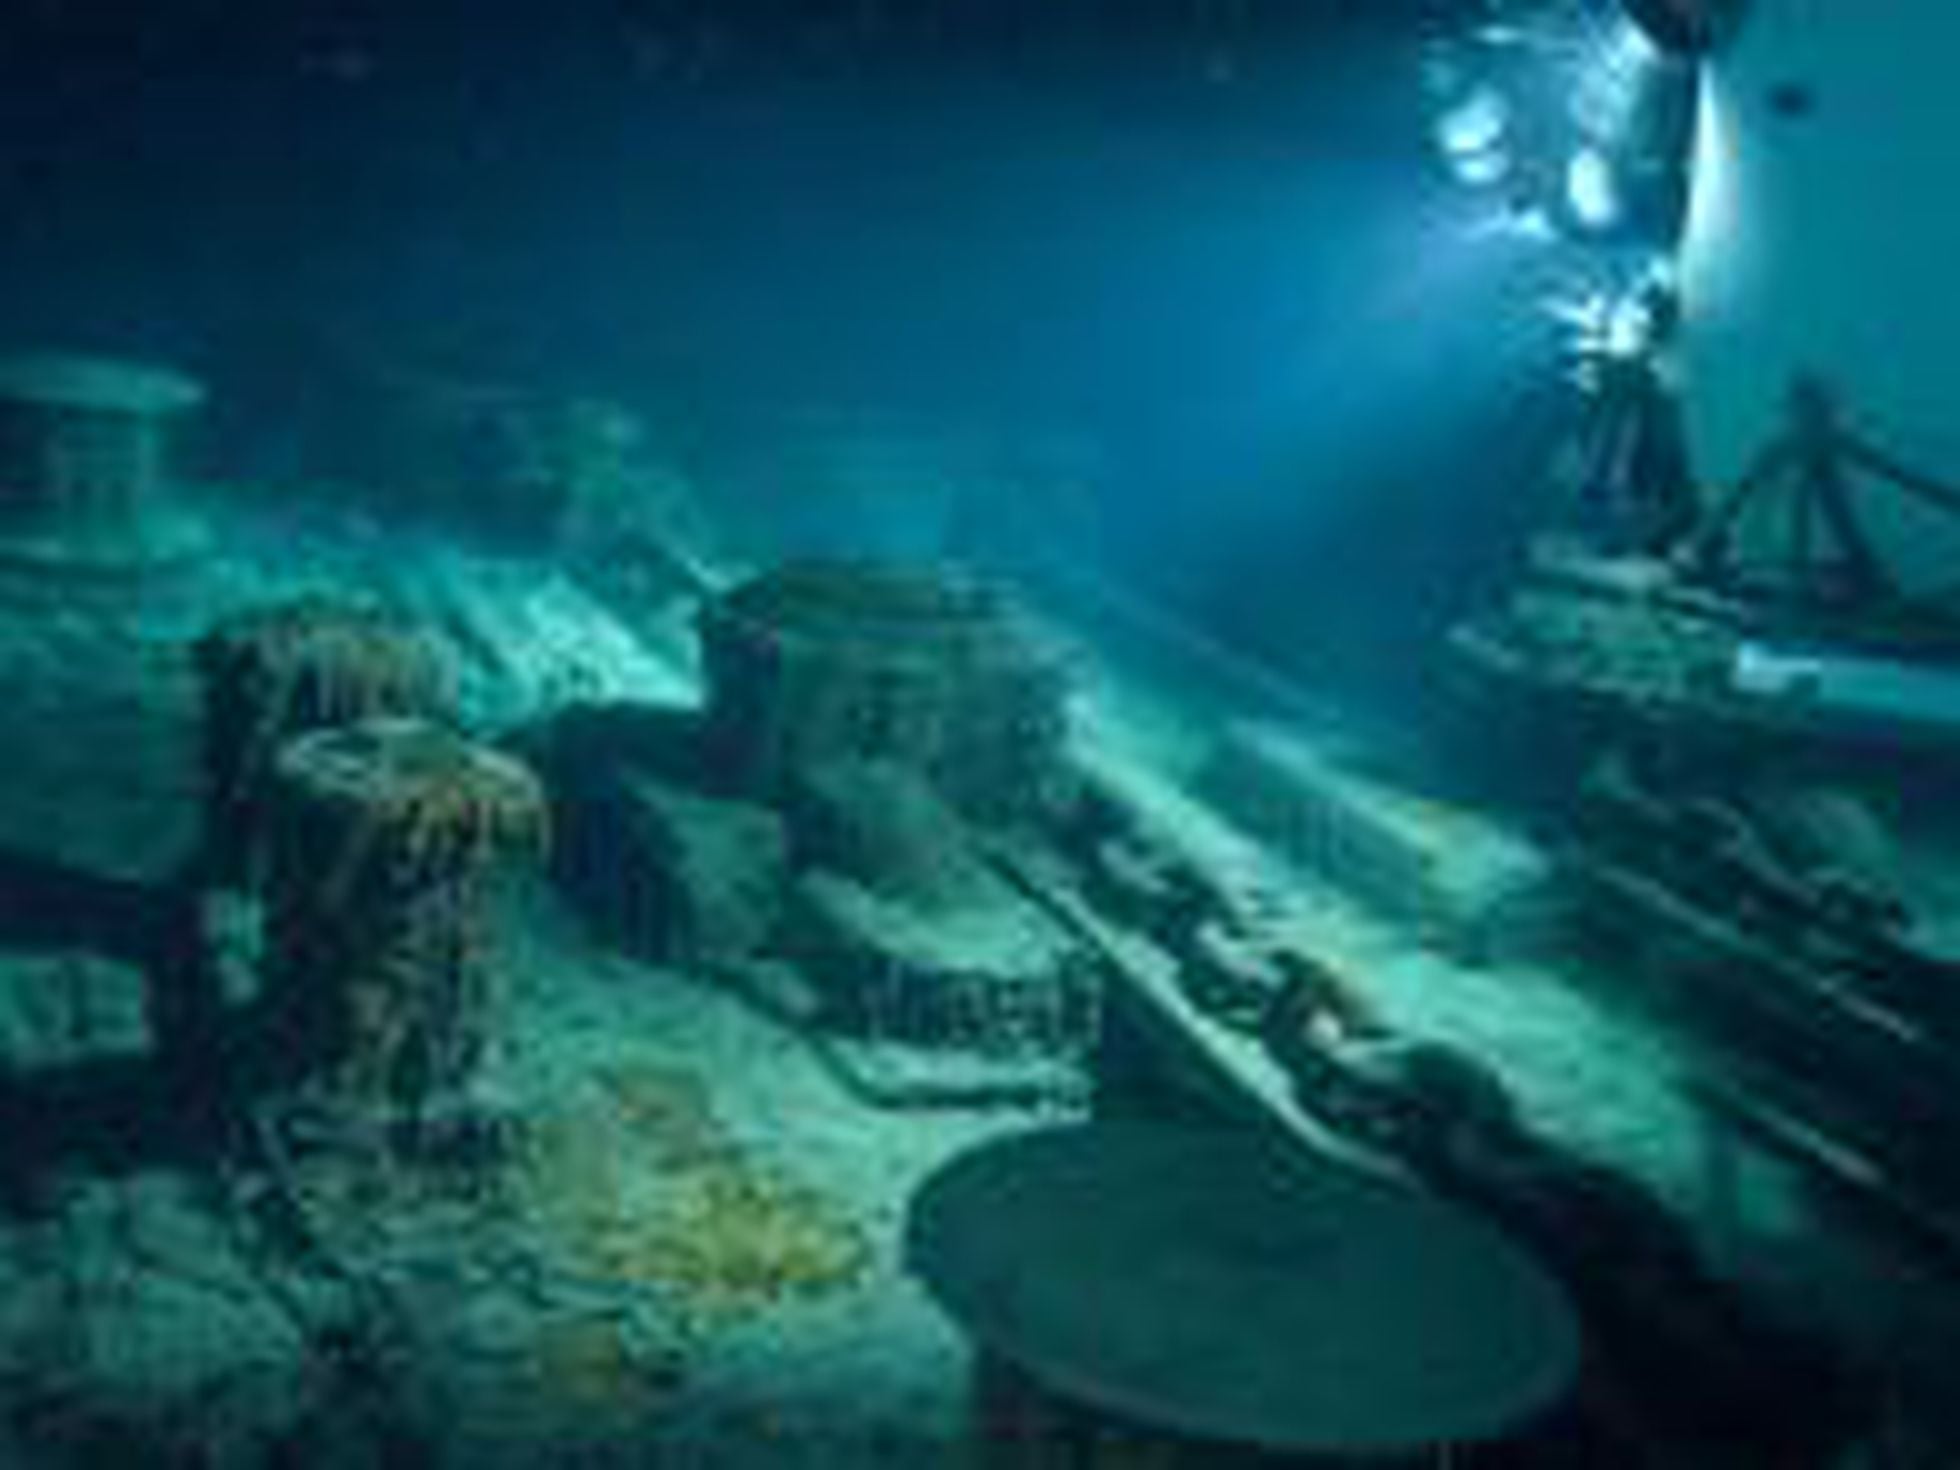 Video | Unseen footage of 'Titanic' shipwreck recorded in 1986 emerges |  Culture | EL PAÍS English